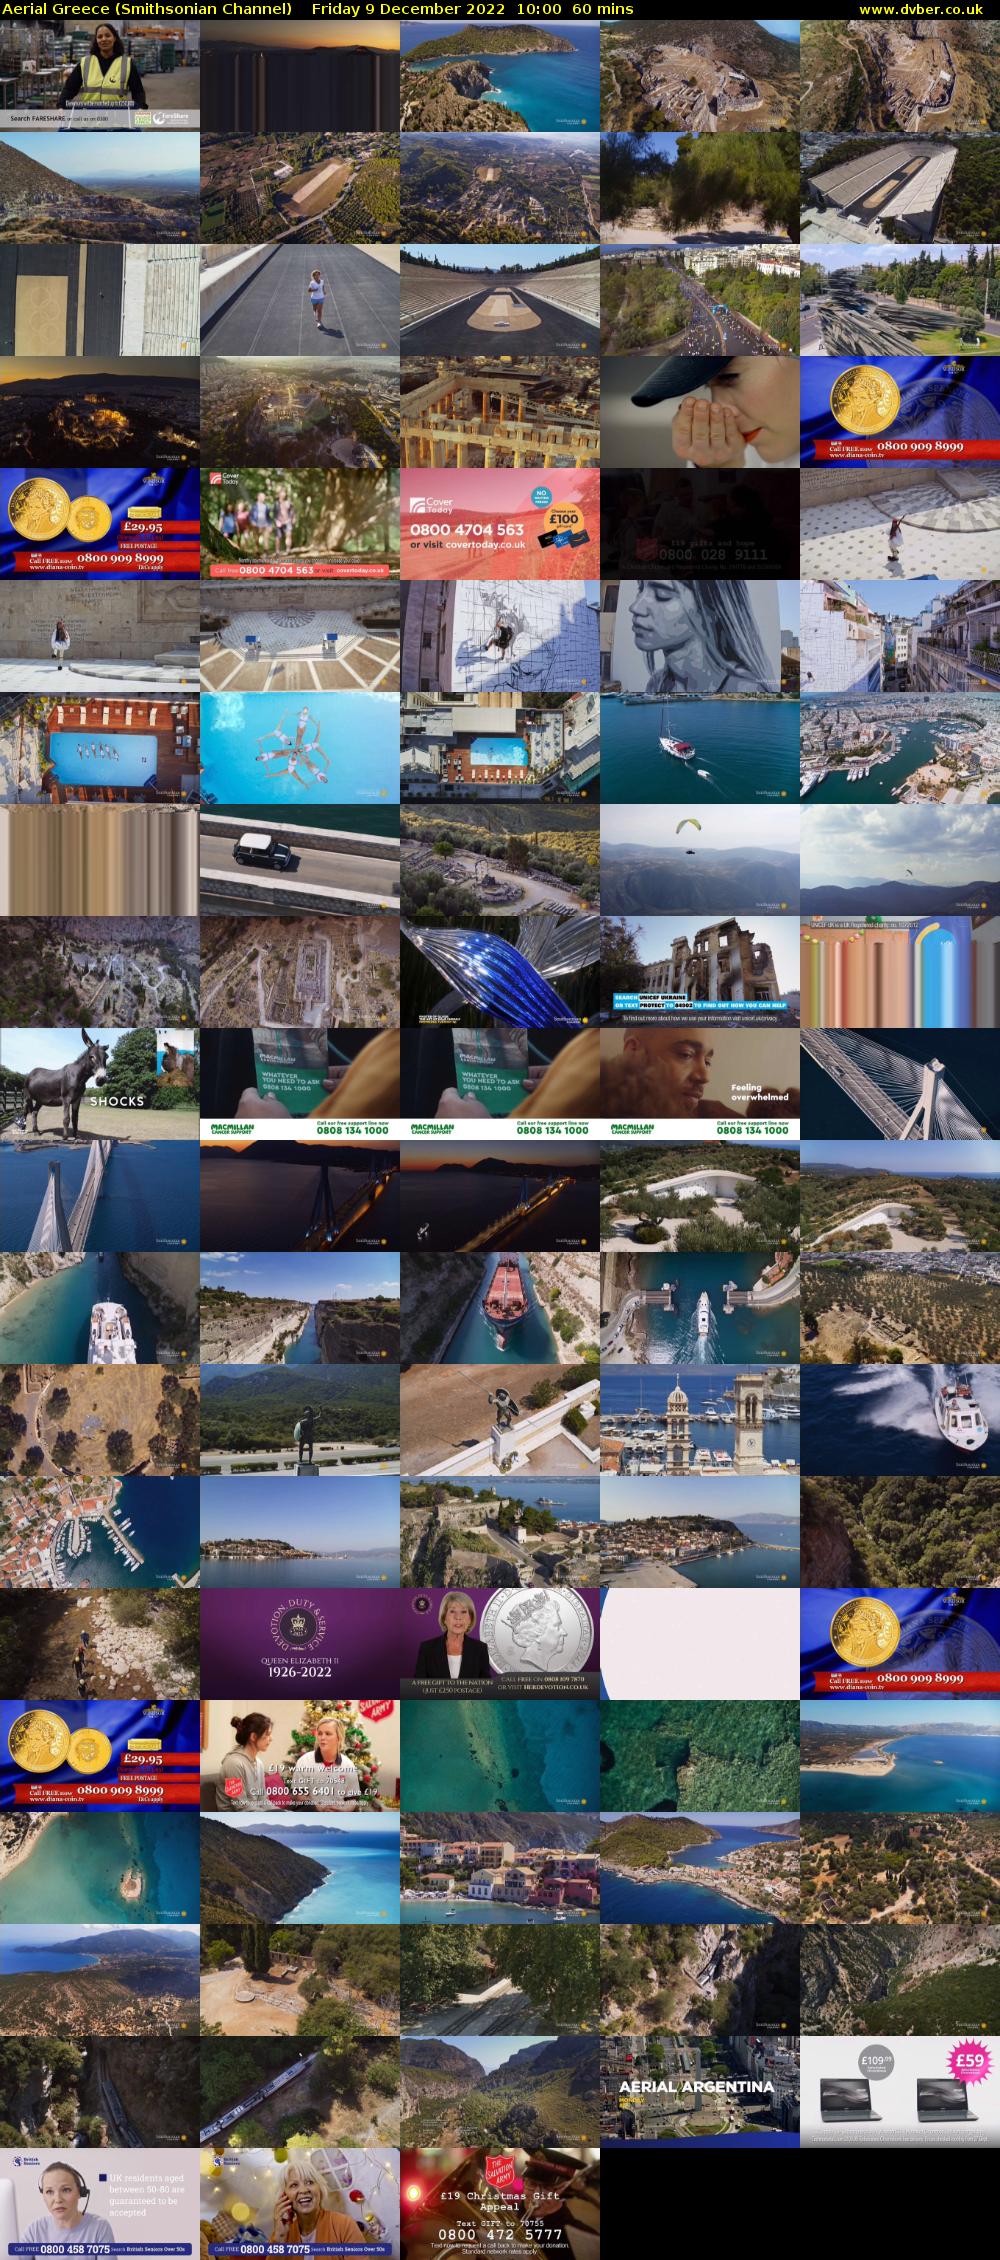 Aerial Greece (Smithsonian Channel) Friday 9 December 2022 10:00 - 11:00